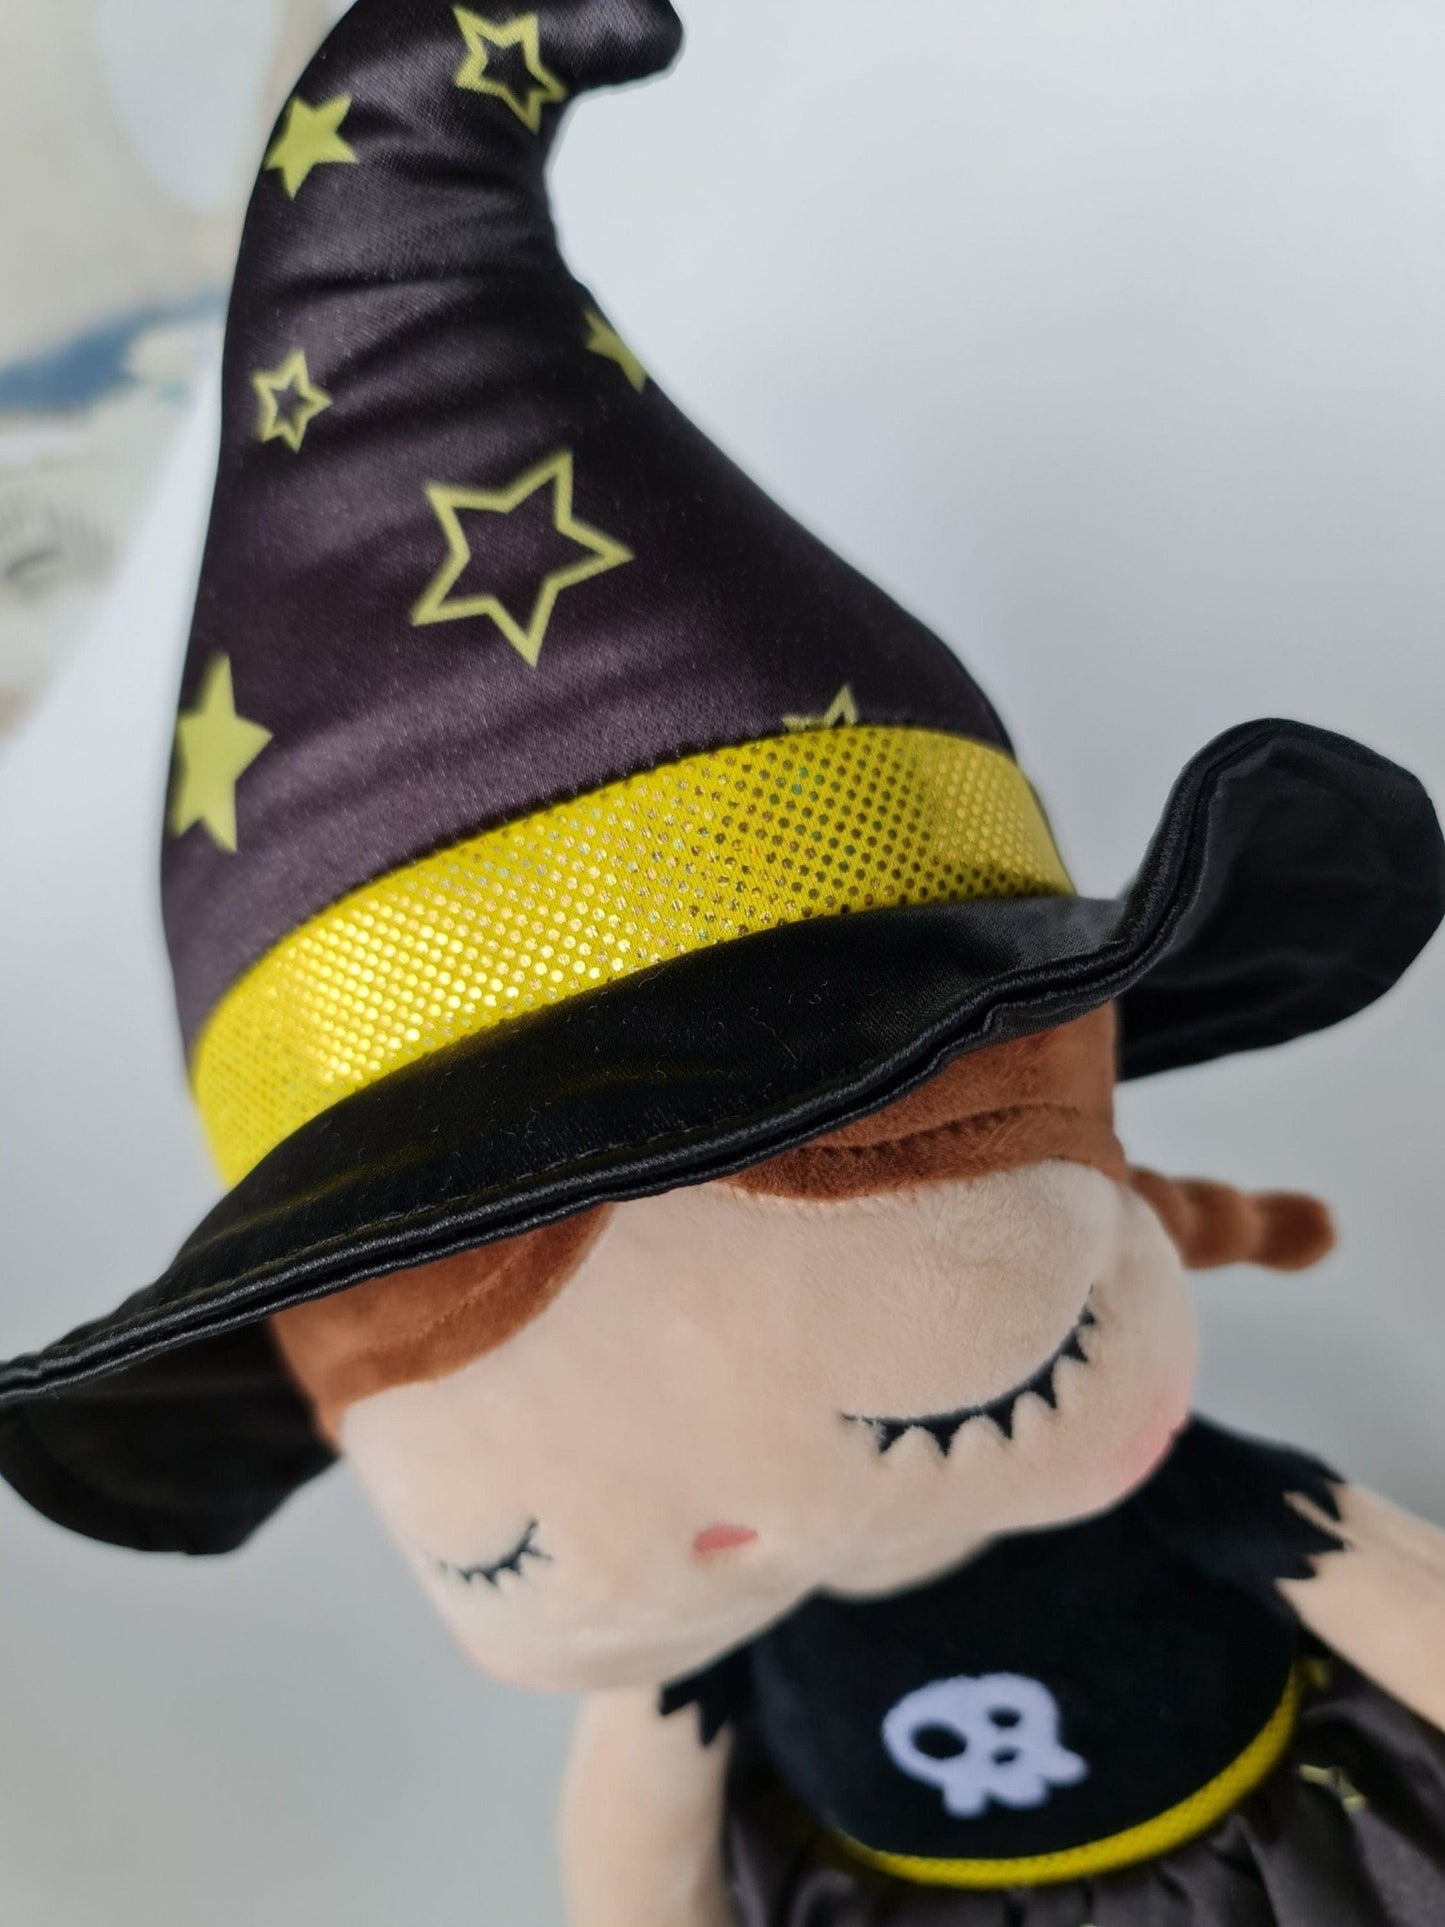 Personalised Metoo Halloween Witch DollKiddio